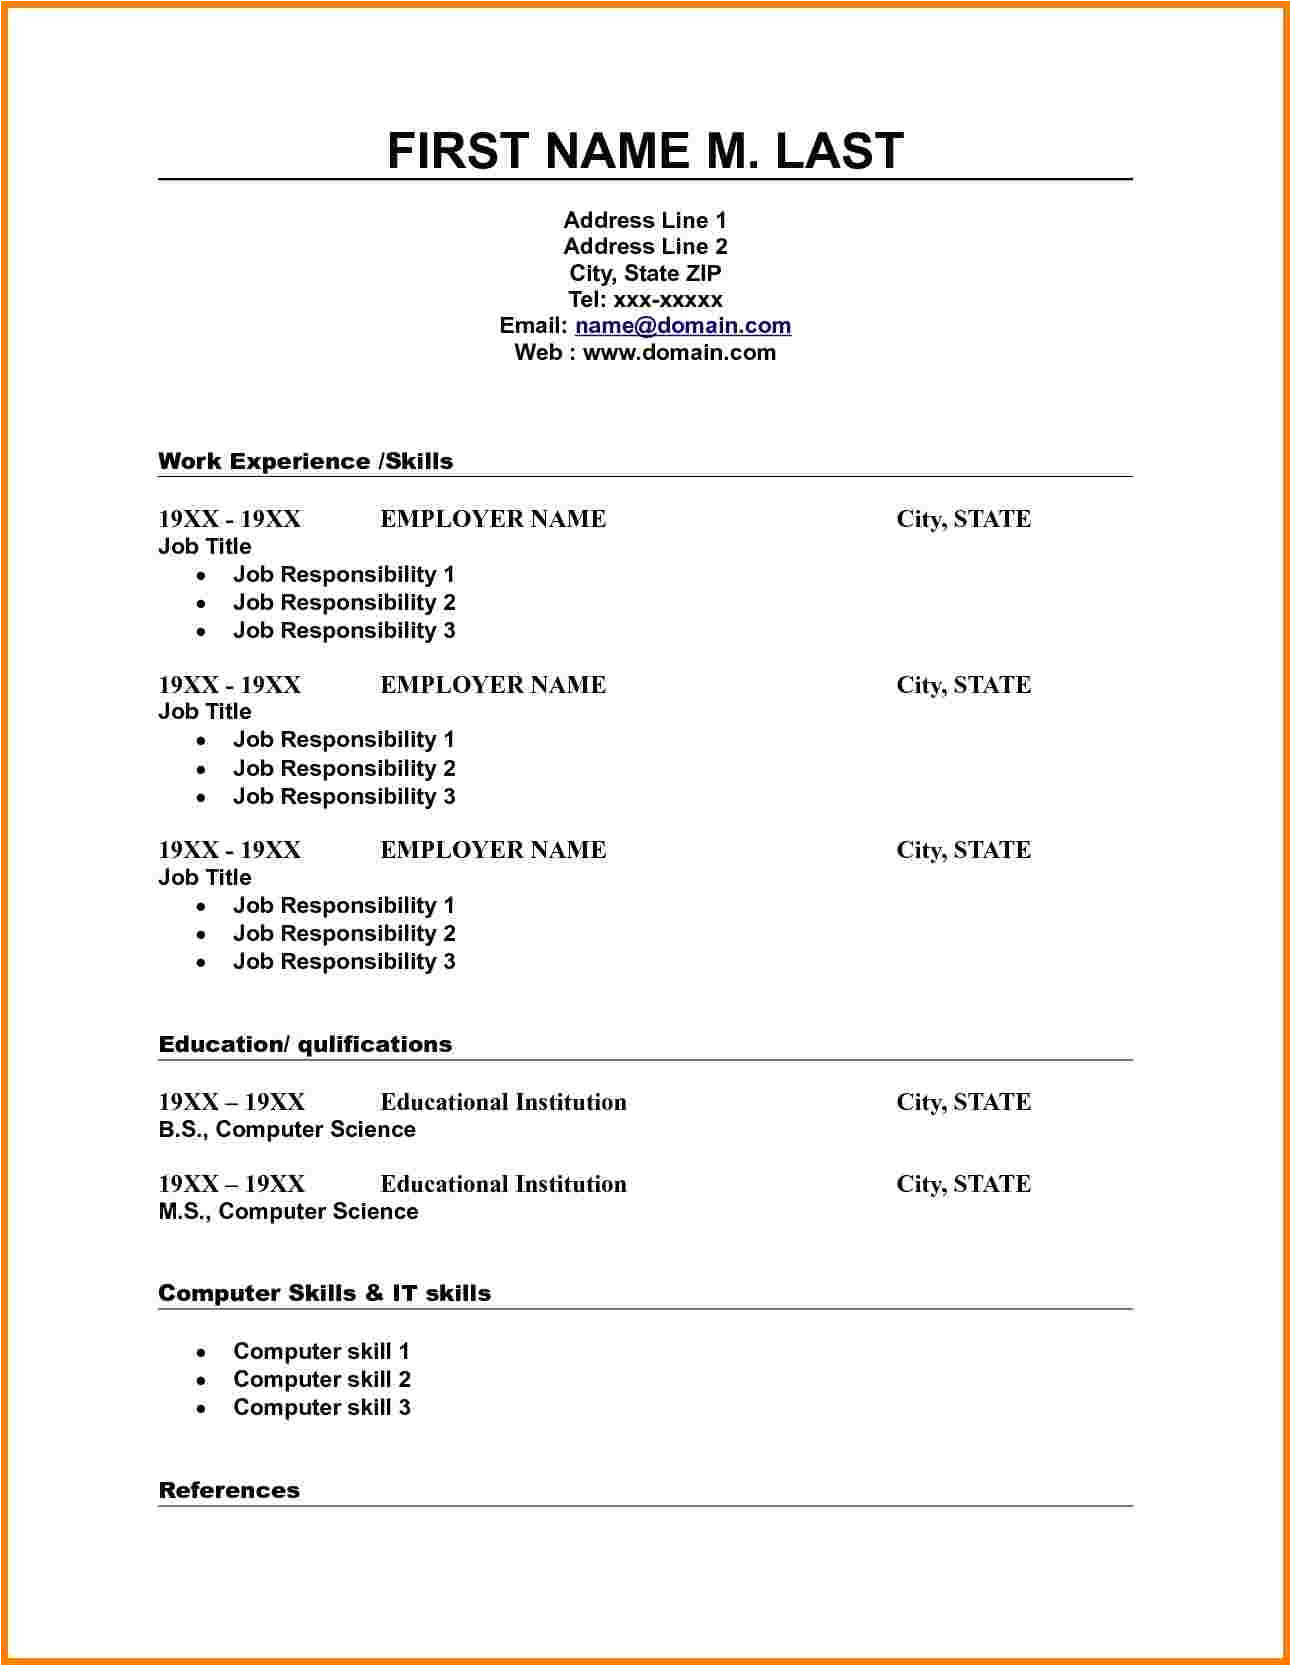 Free Blank Resume Templates Download 8 Blank Basic Resume Templates Professional Resume List